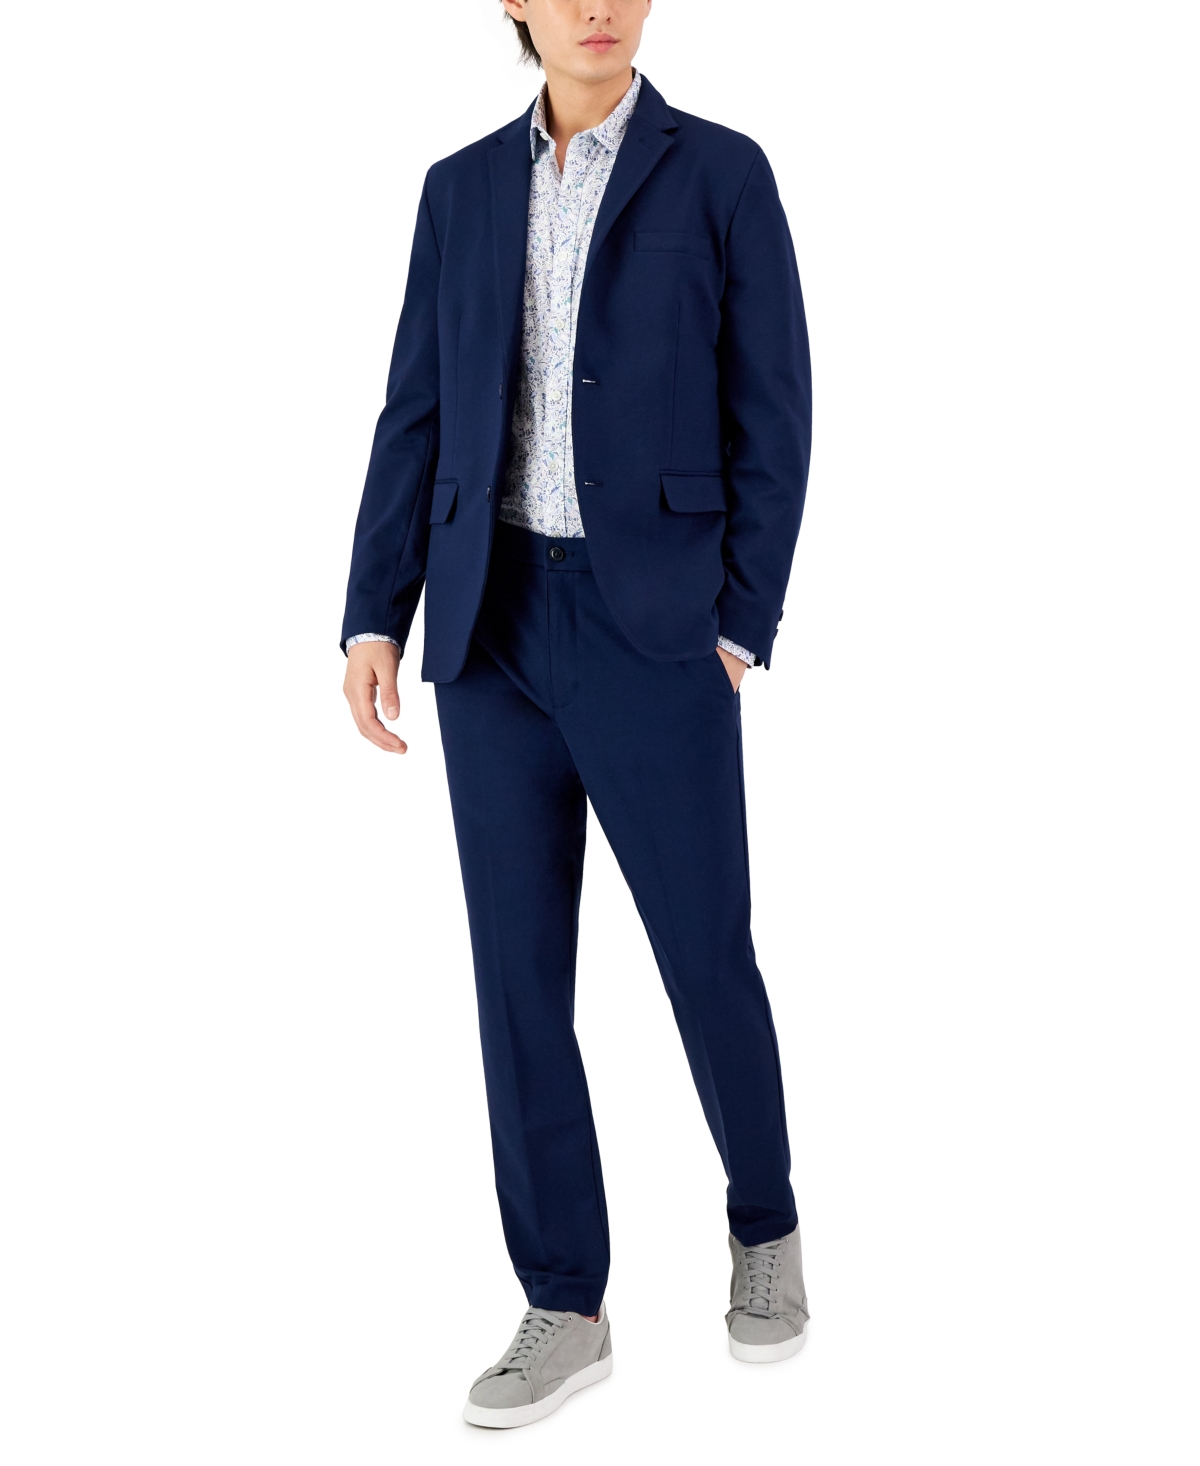 Men's Modern Knit Suit Jacket, Created for Macy's - Neo Navy